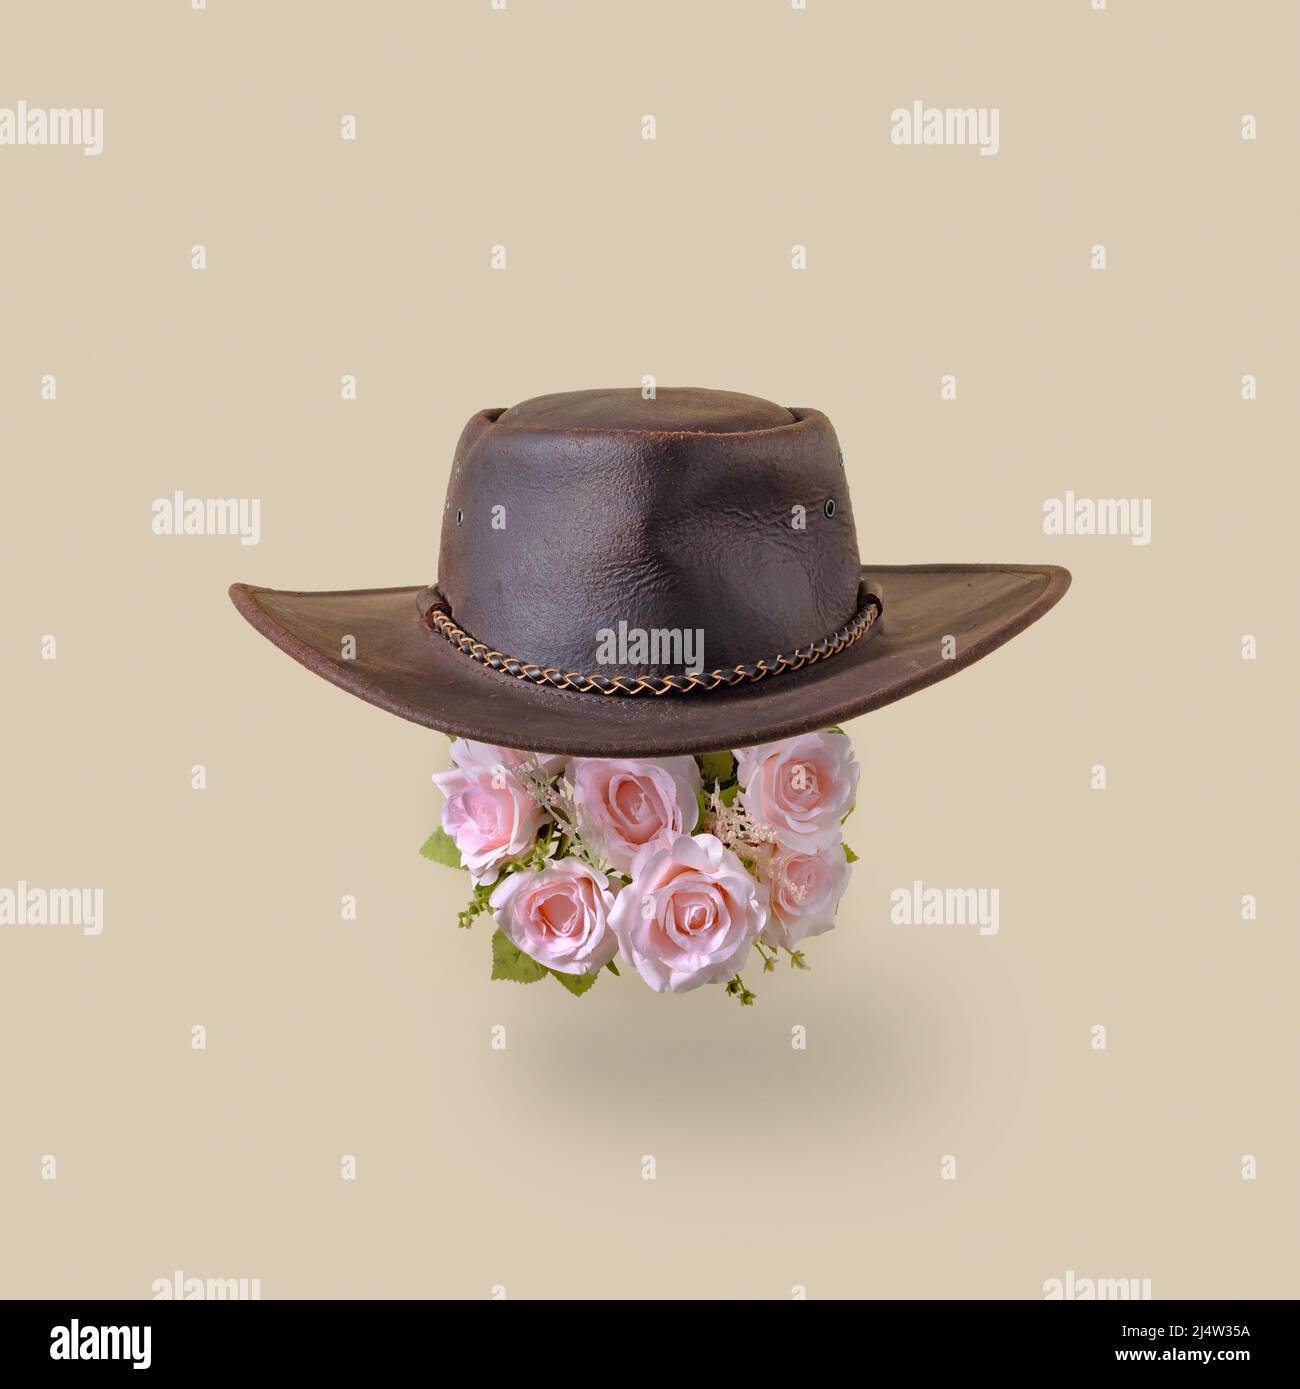 Leather retro vintage america cowboy hat and pink rose flowers. Minimal trend wild west concept. Stock Photo